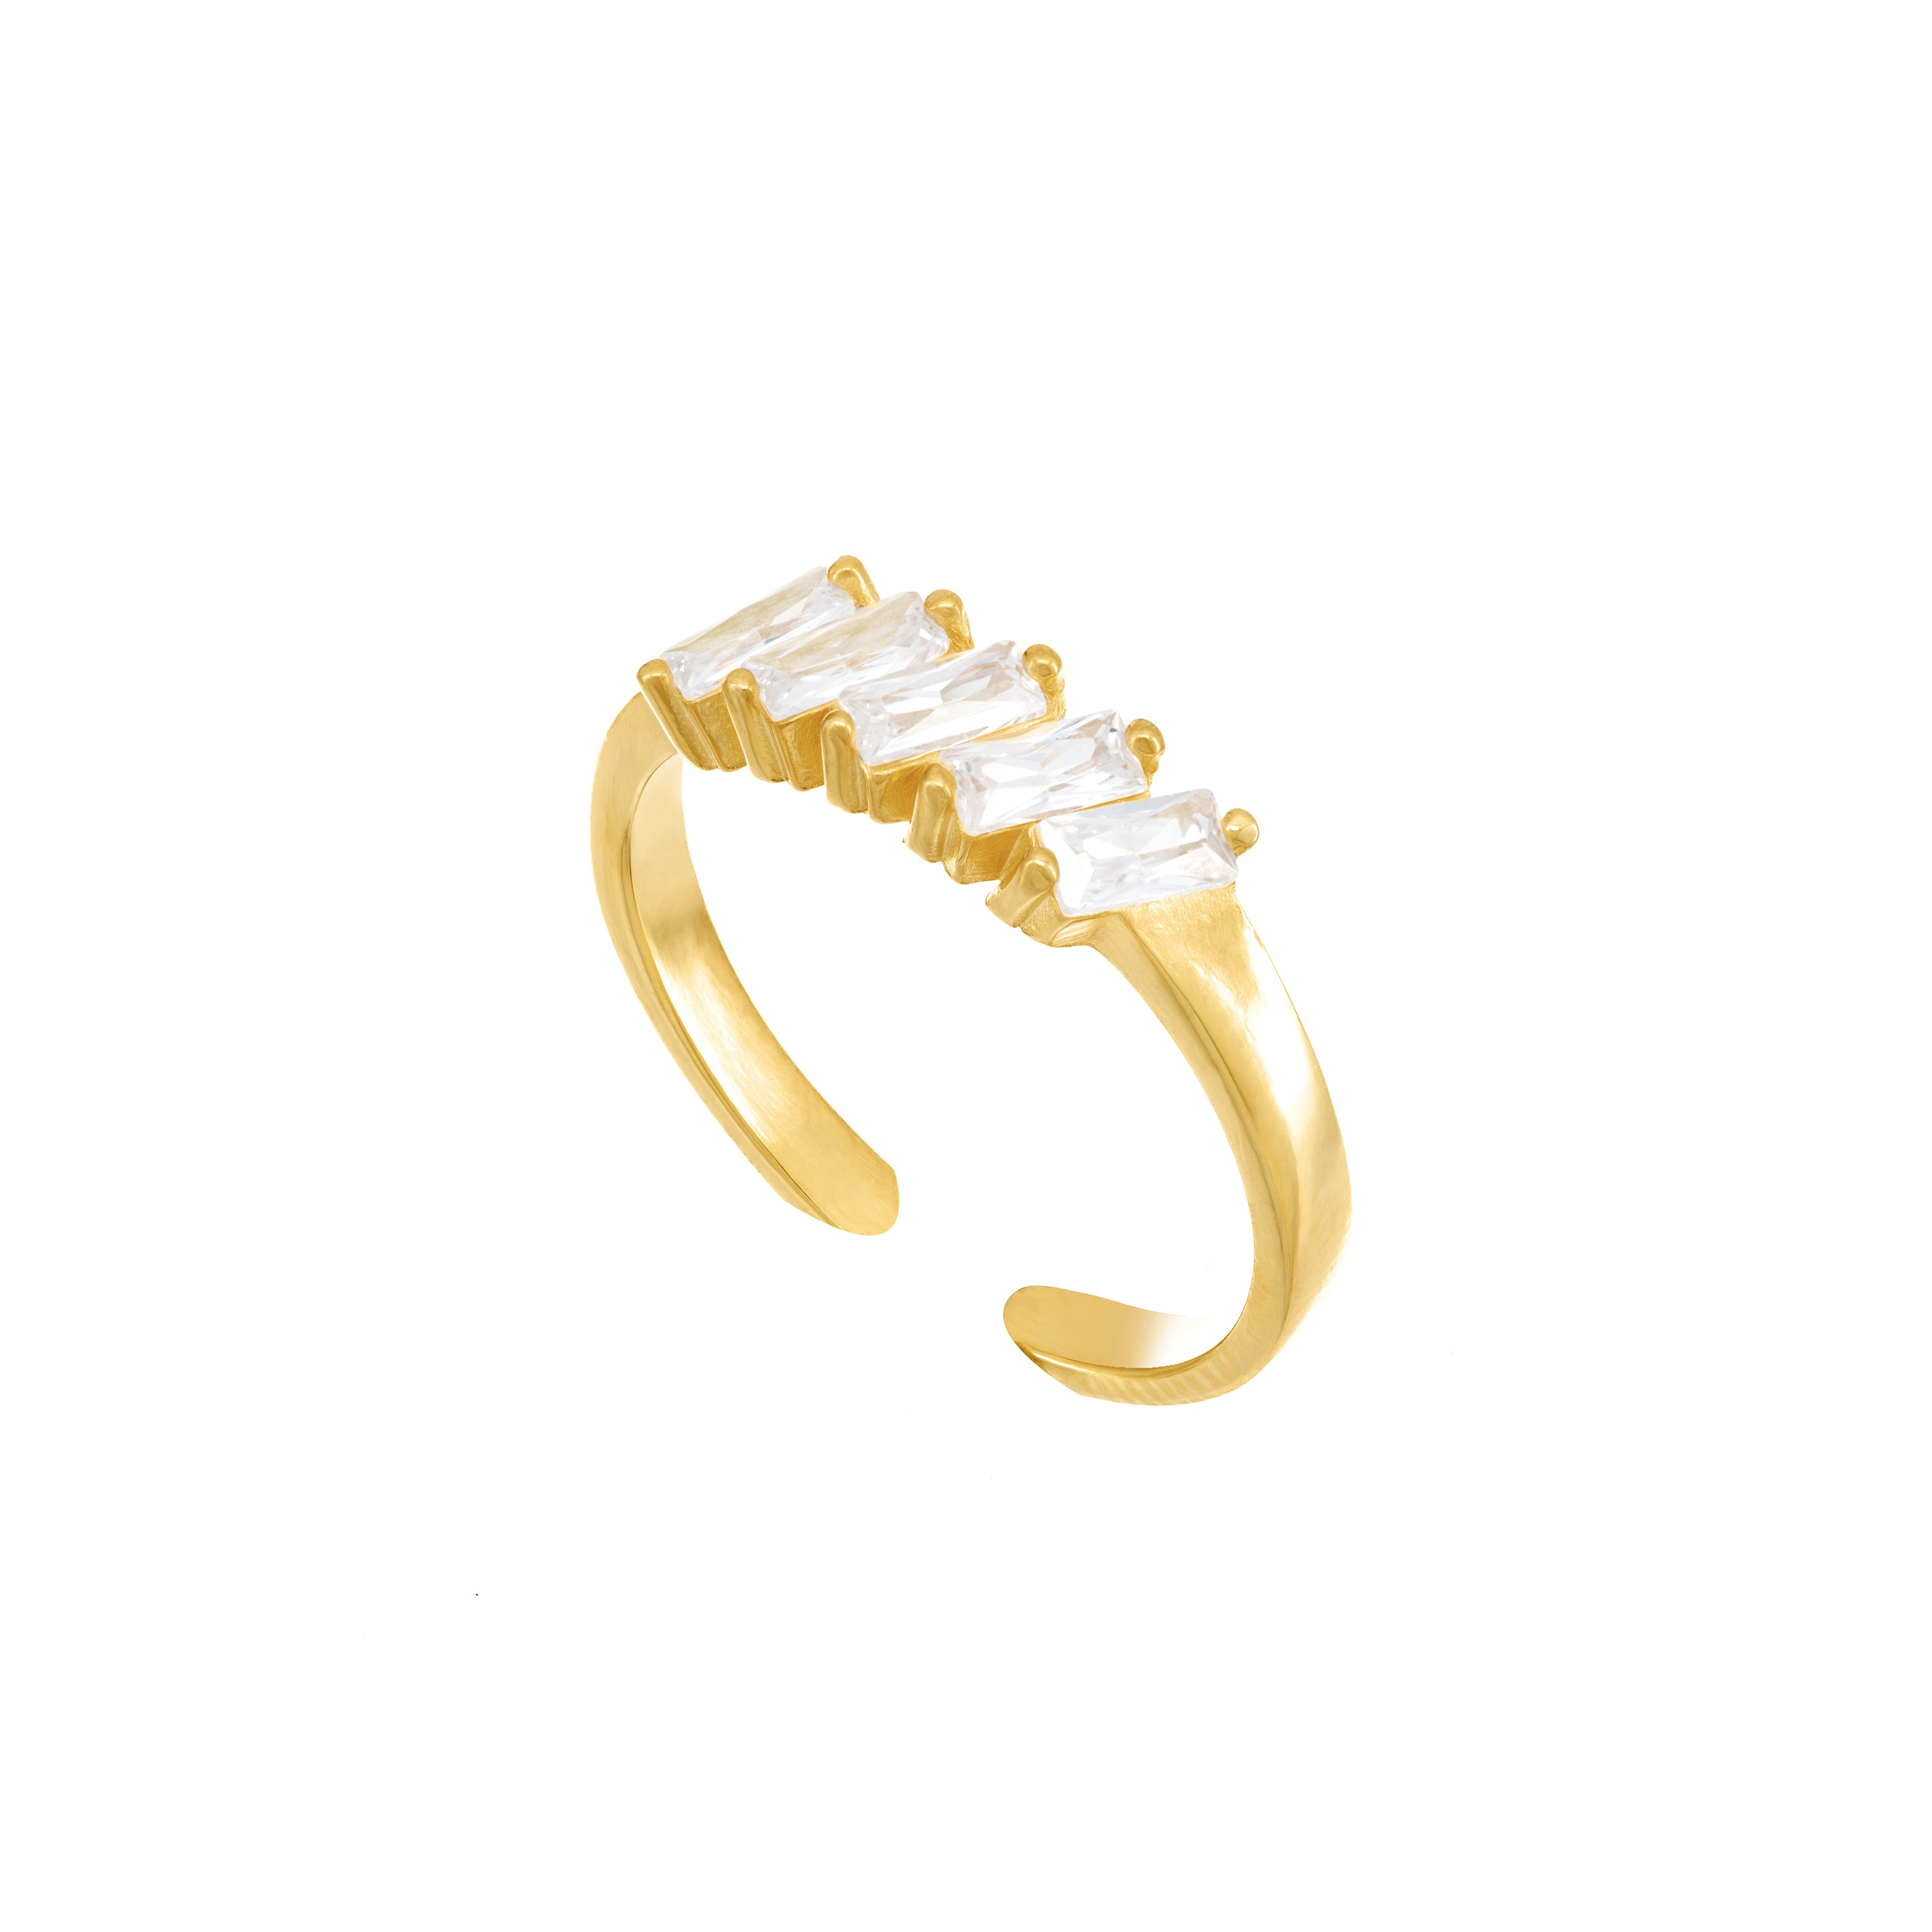 Five Baguette Inclined Ring